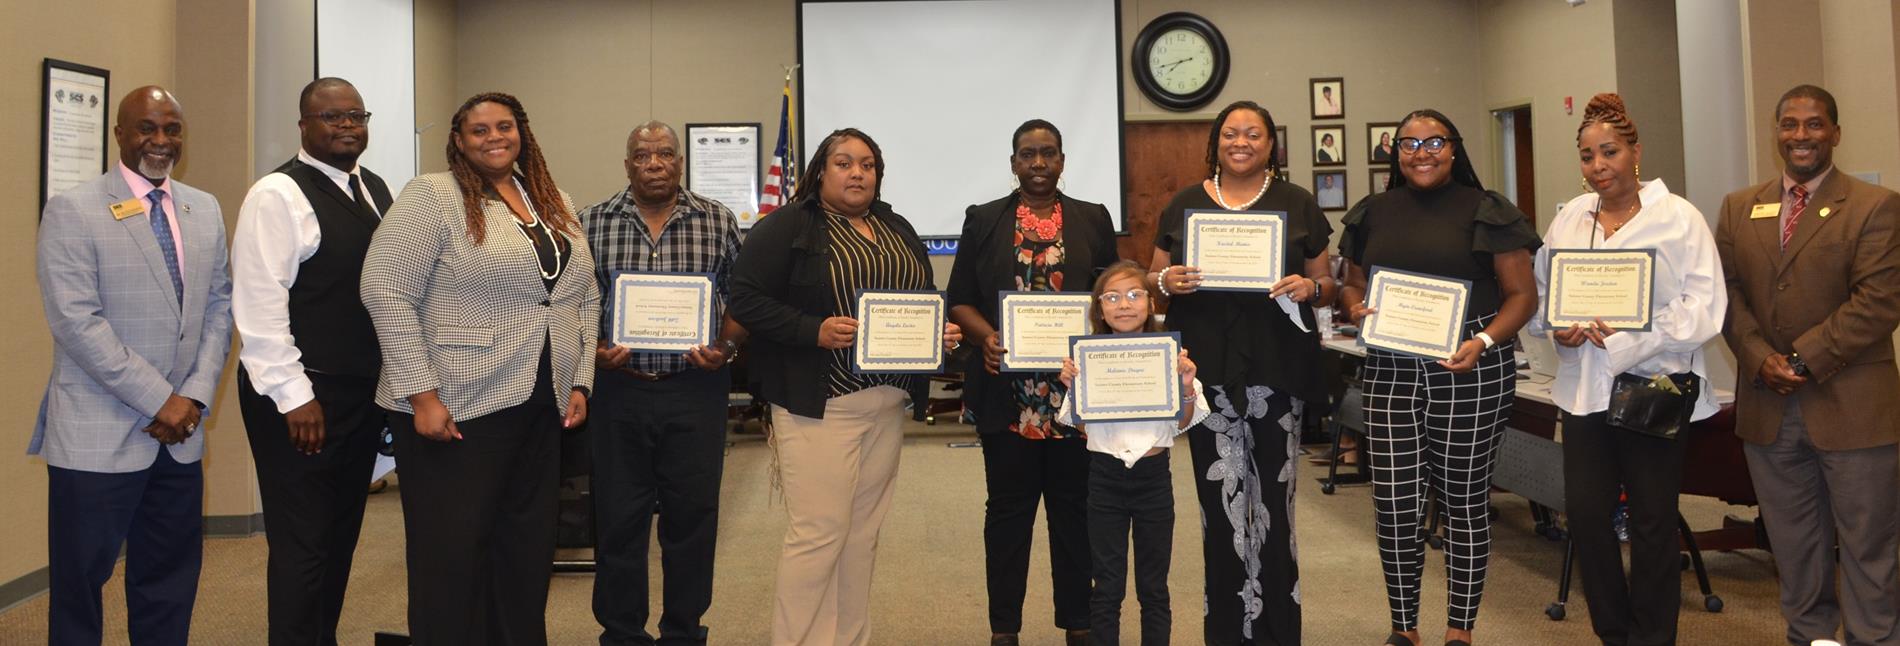 Sumter County Elementary Honorees